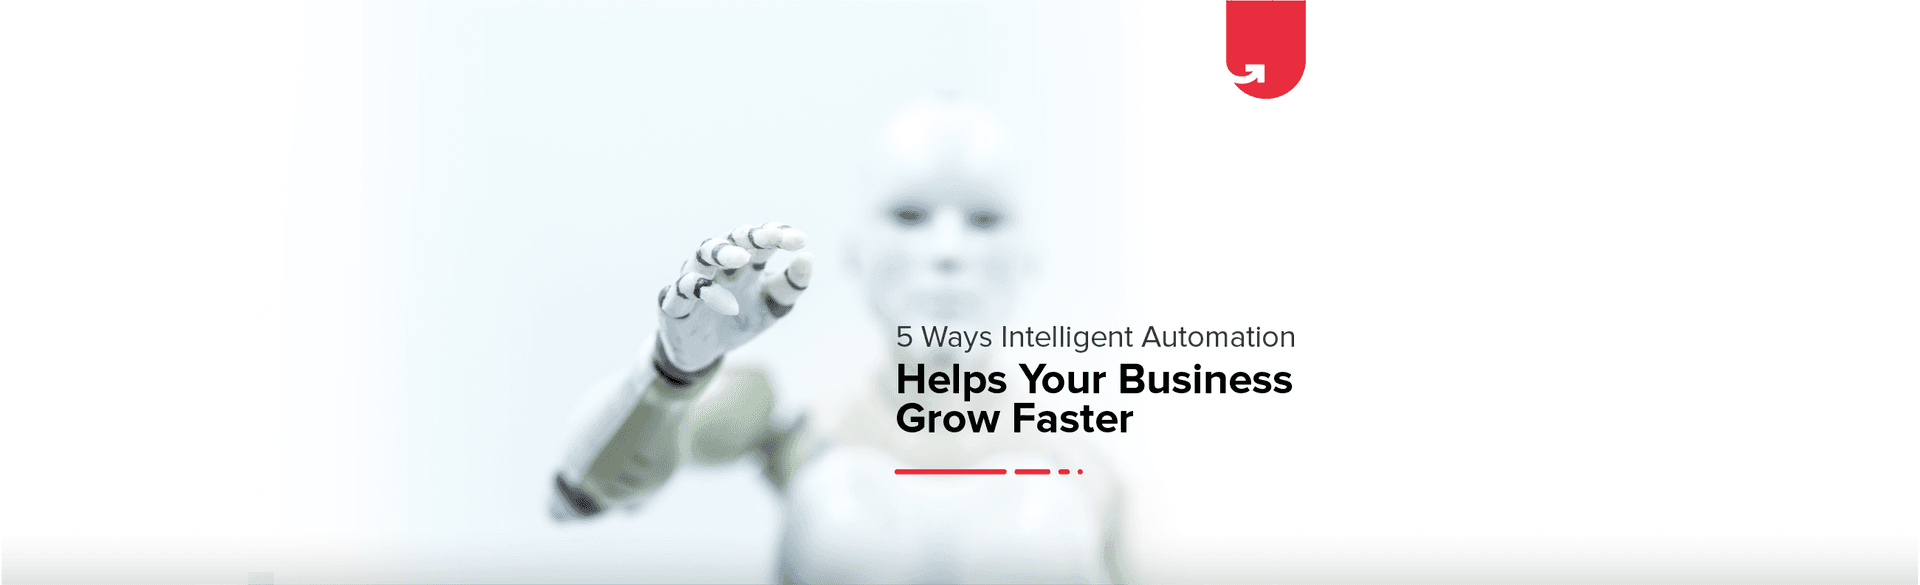 5 Ways Intelligent Automation Helps Your Business Grow Faster